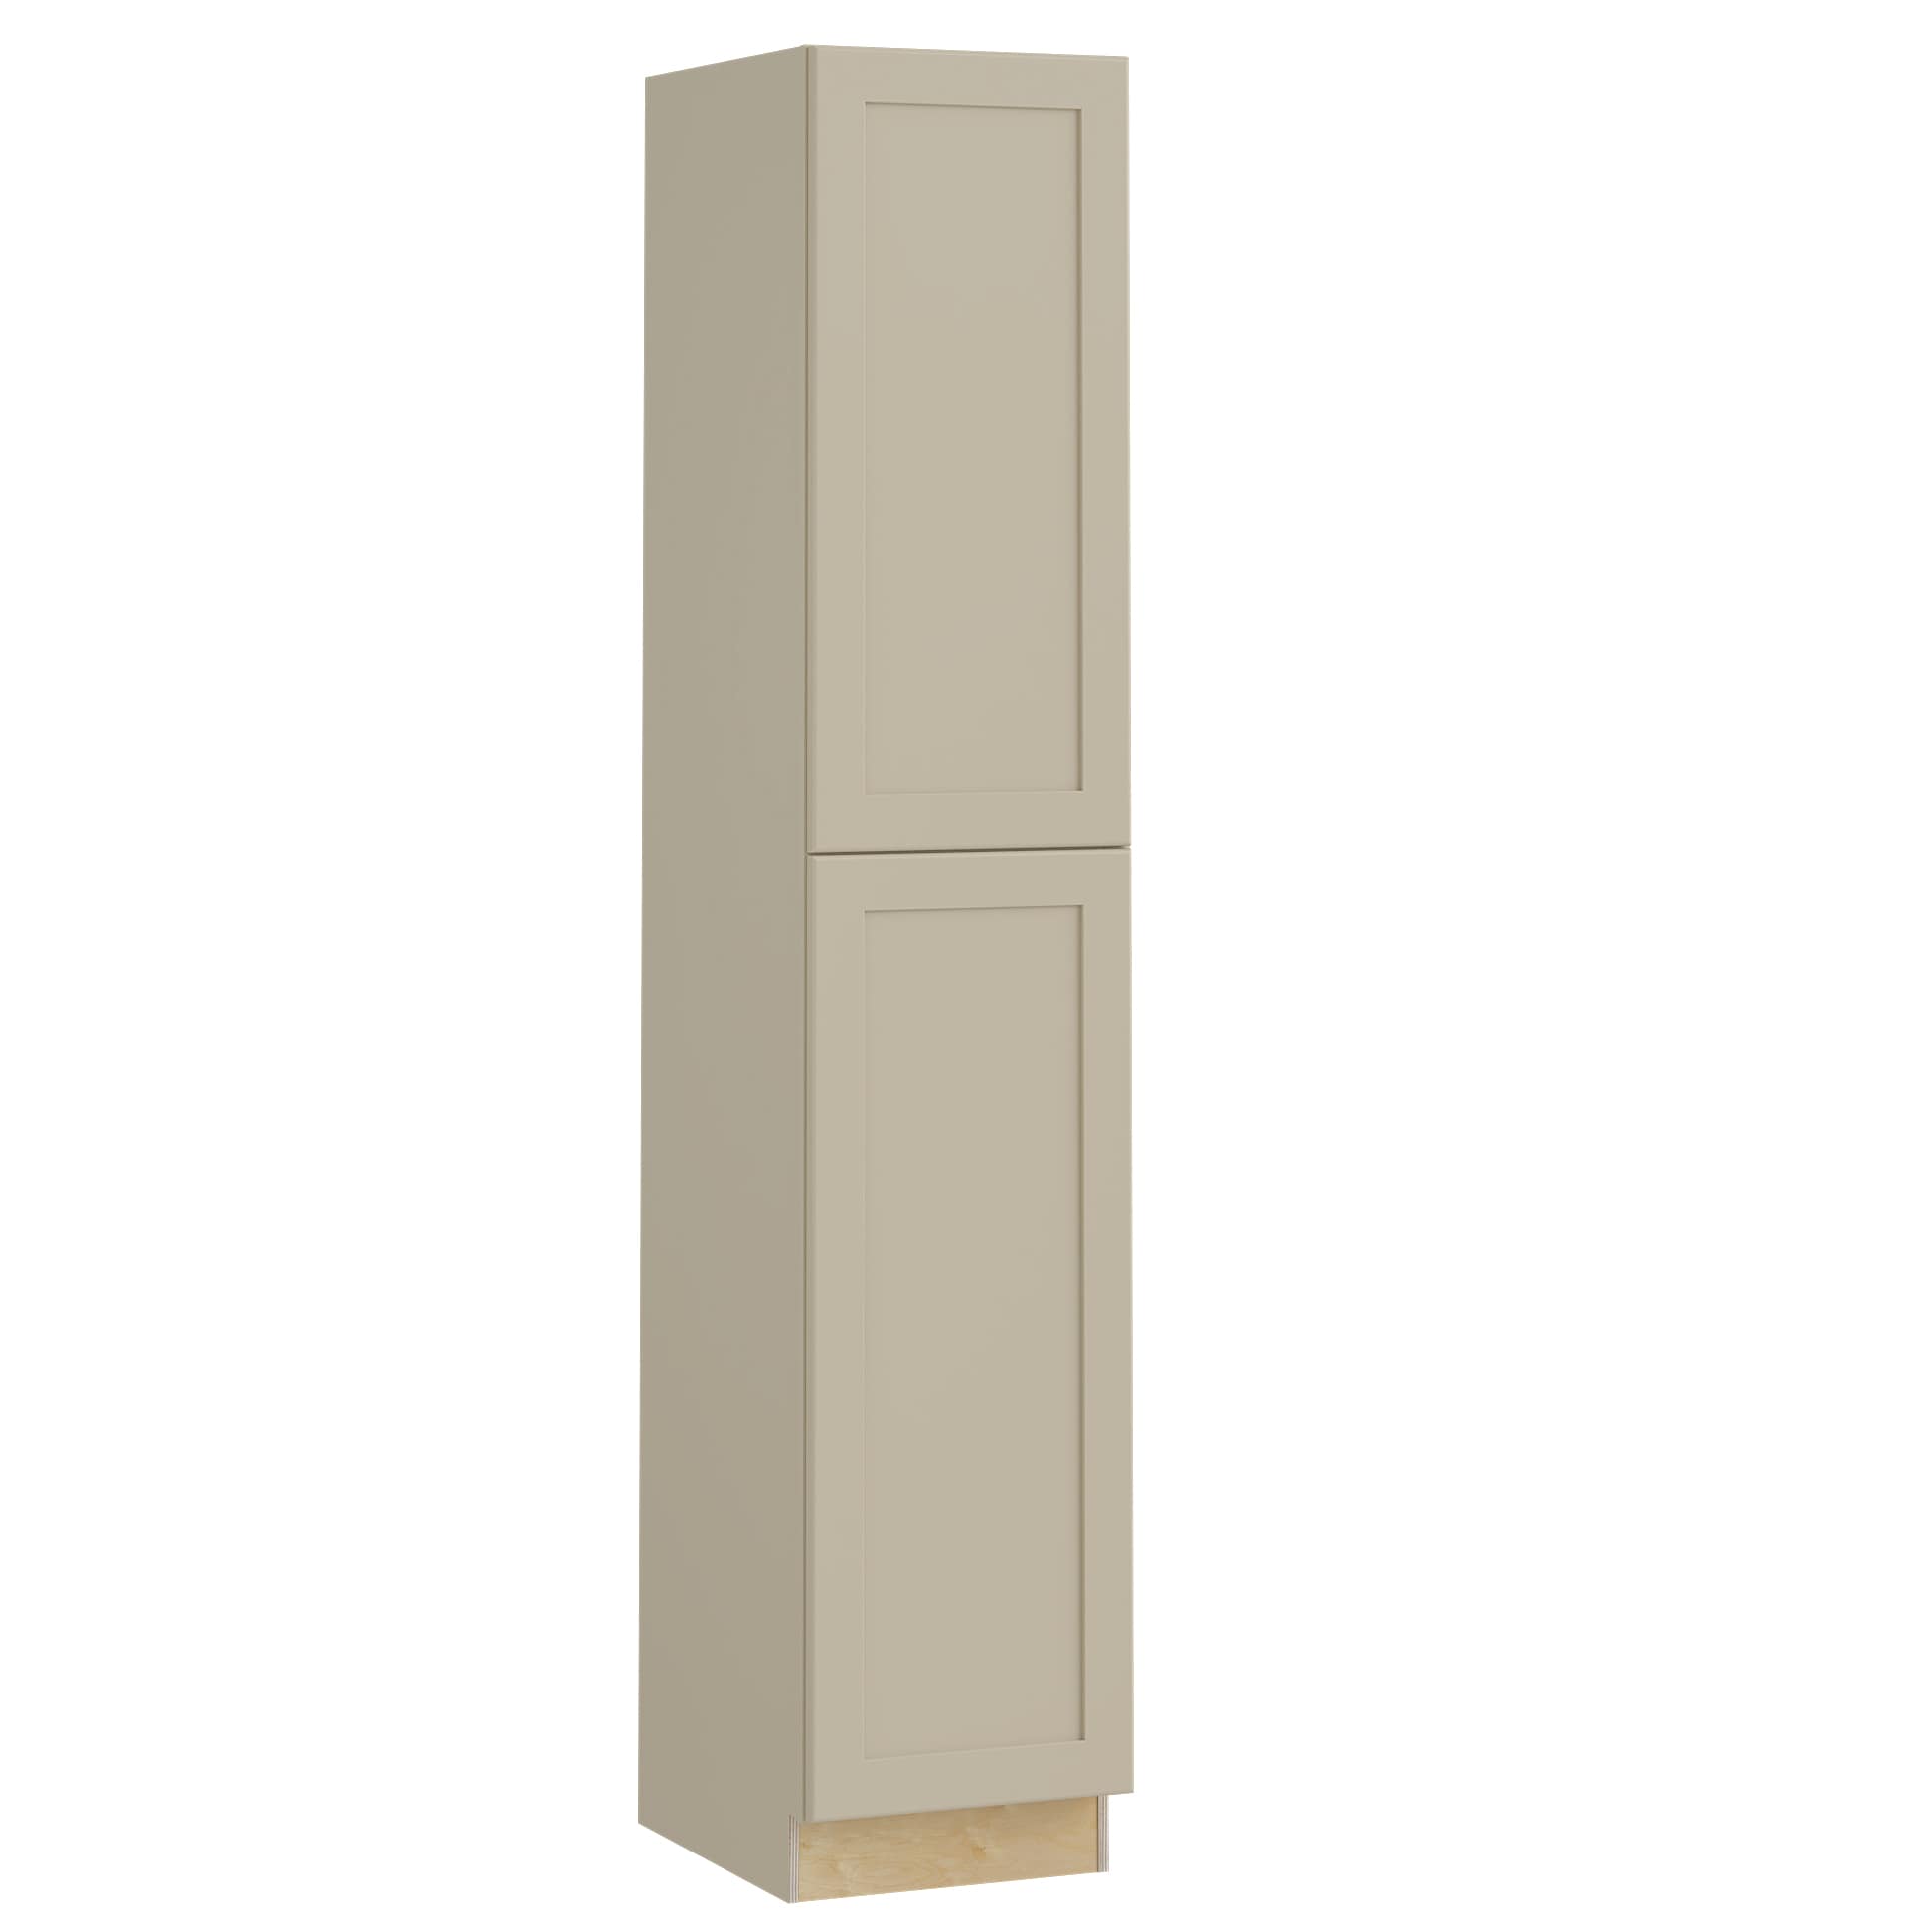 Luxxe Cabinetry 18-in W x 96-in H x 24-in D Norfolk Blended Cream Painted Door Pantry Fully Assembled Semi-custom Cabinet in Off-White | U182496R-NBC